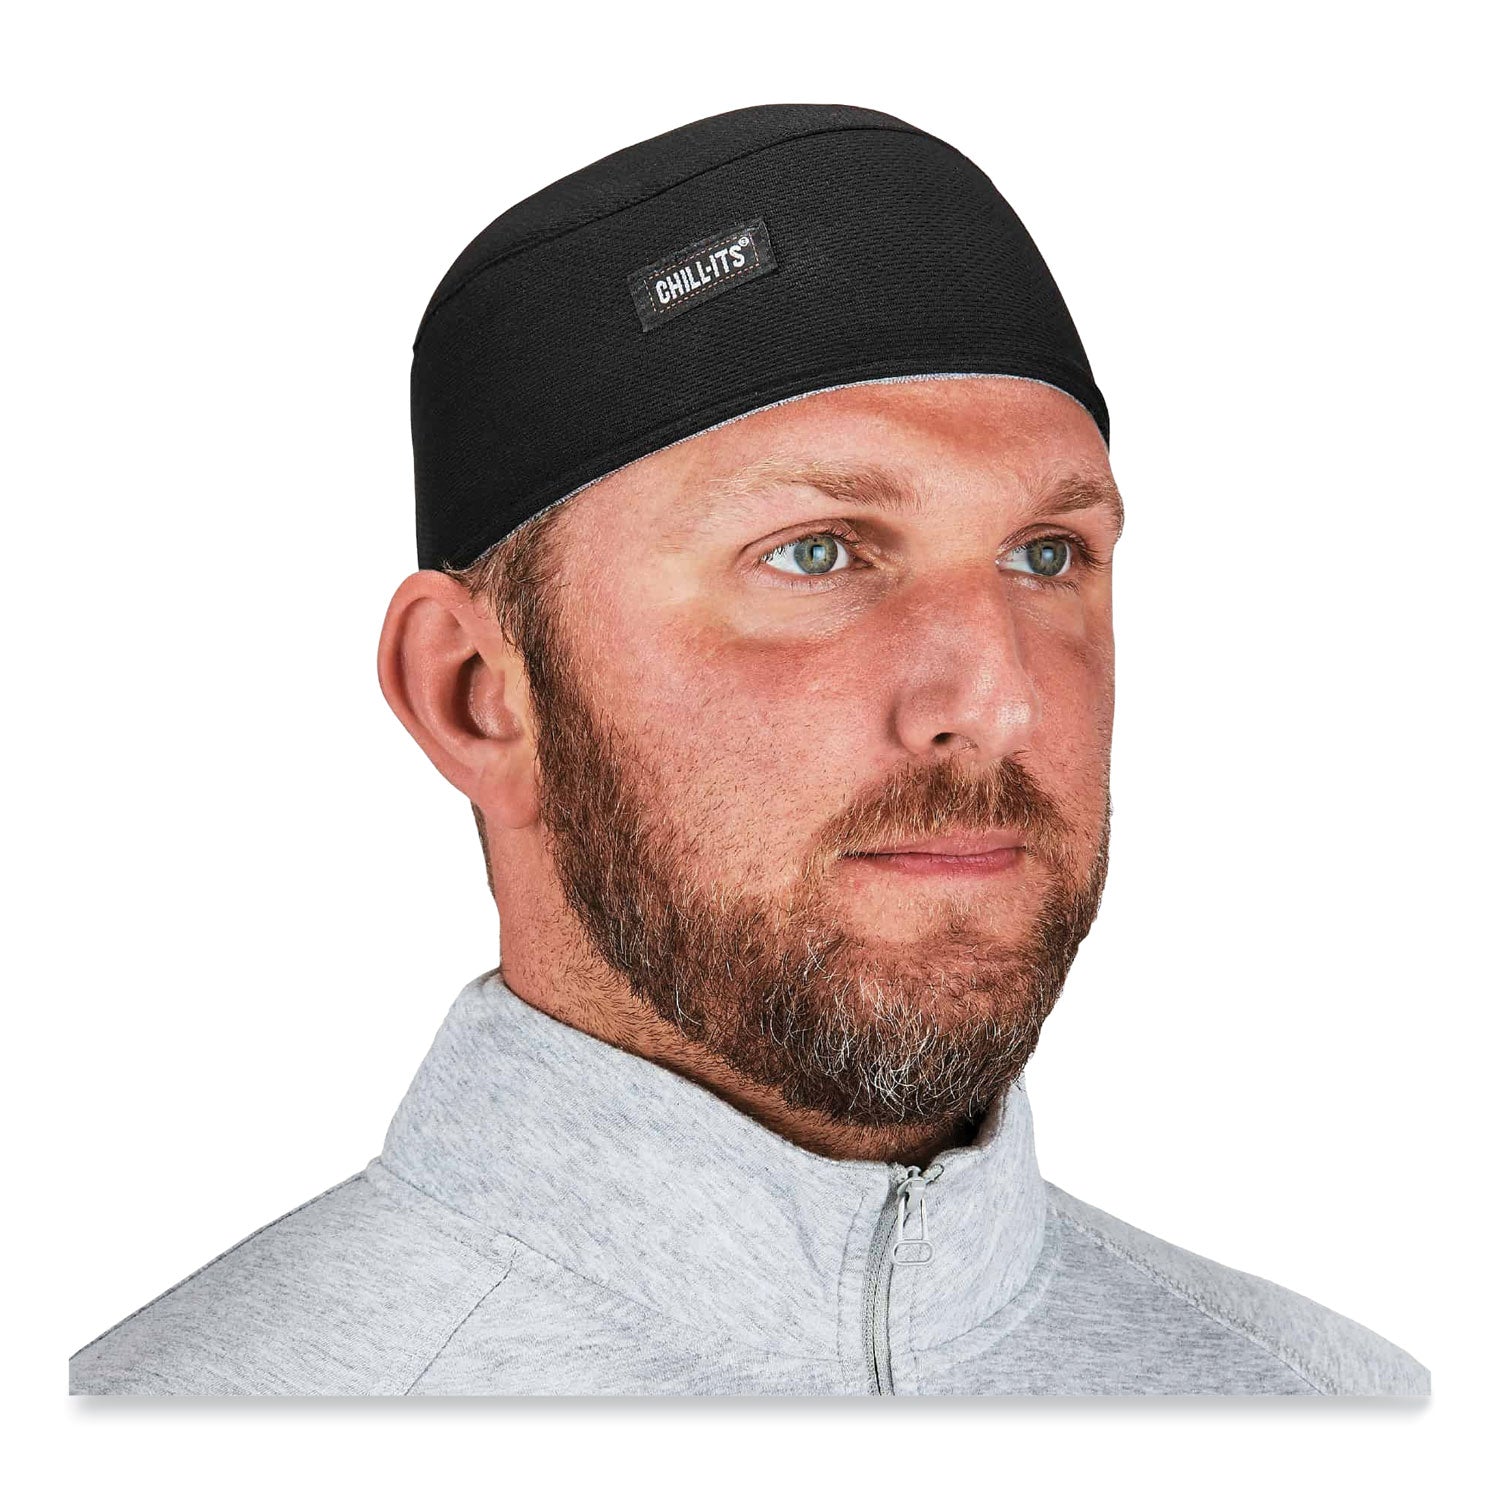 chill-its-6630-high-performance-terry-cloth-skull-cap-polyester-one-size-fits-most-black-ships-in-1-3-business-days_ego12516 - 6